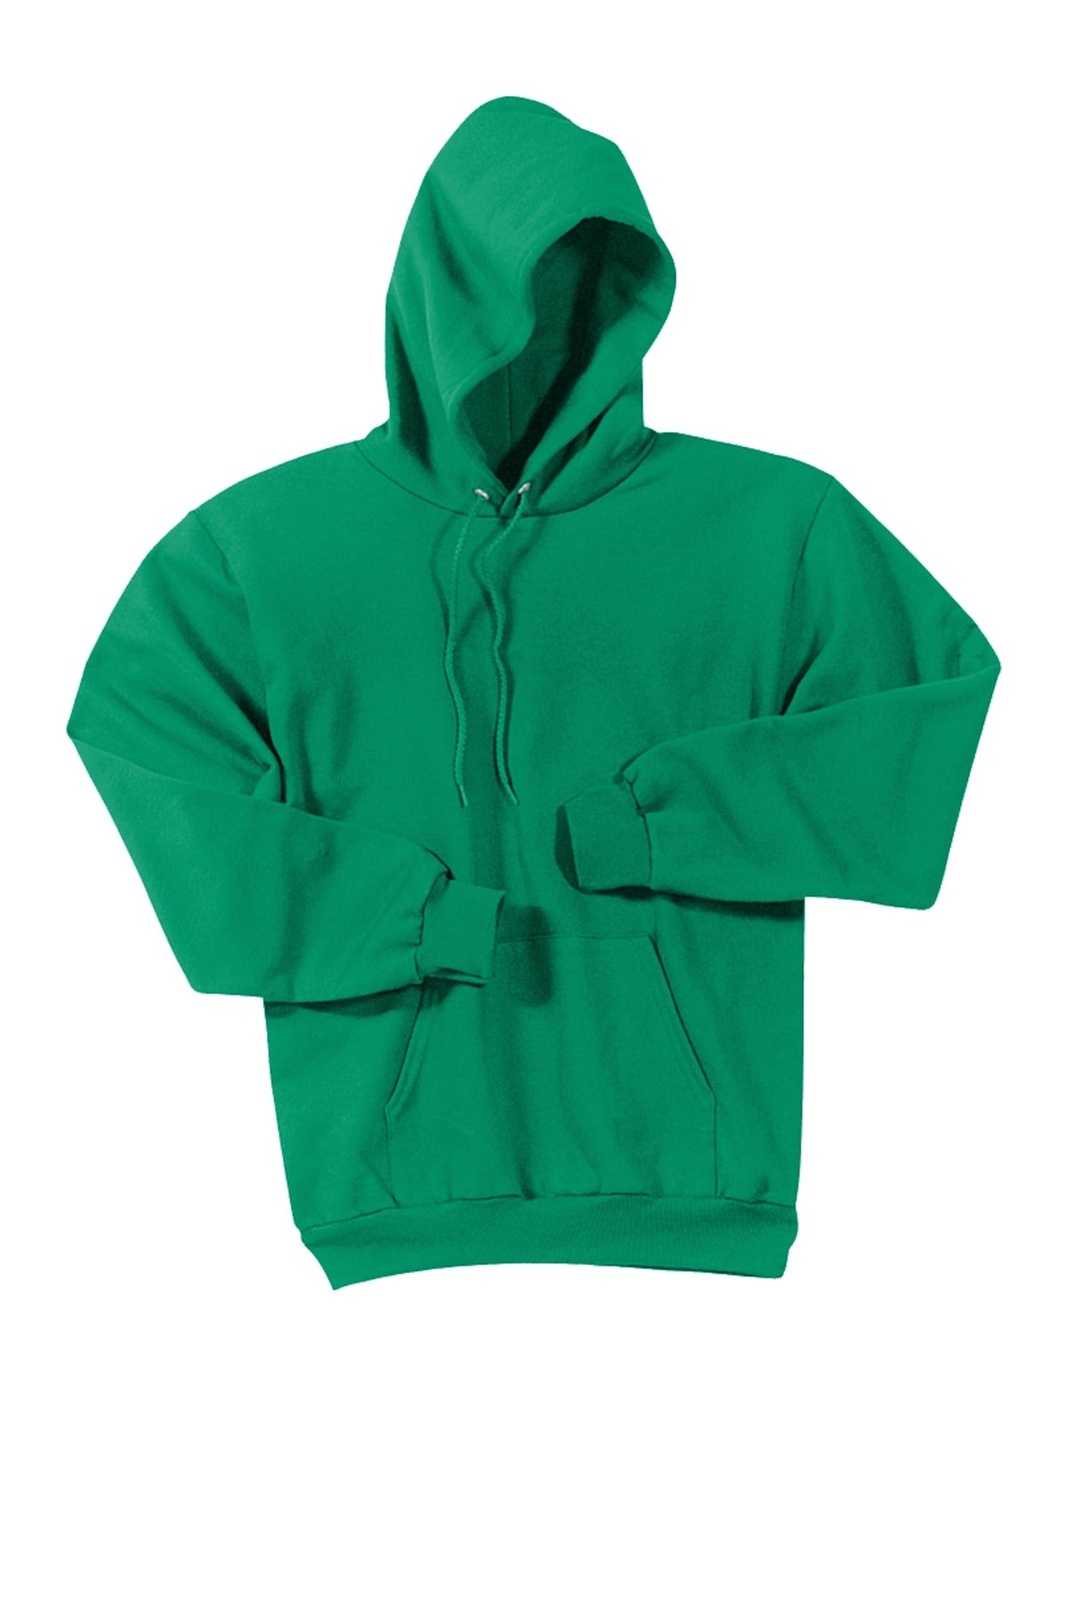 Port & Company PC90HT Tall Essential Fleece Pullover Hooded Sweatshirt - Kelly - HIT a Double - 1